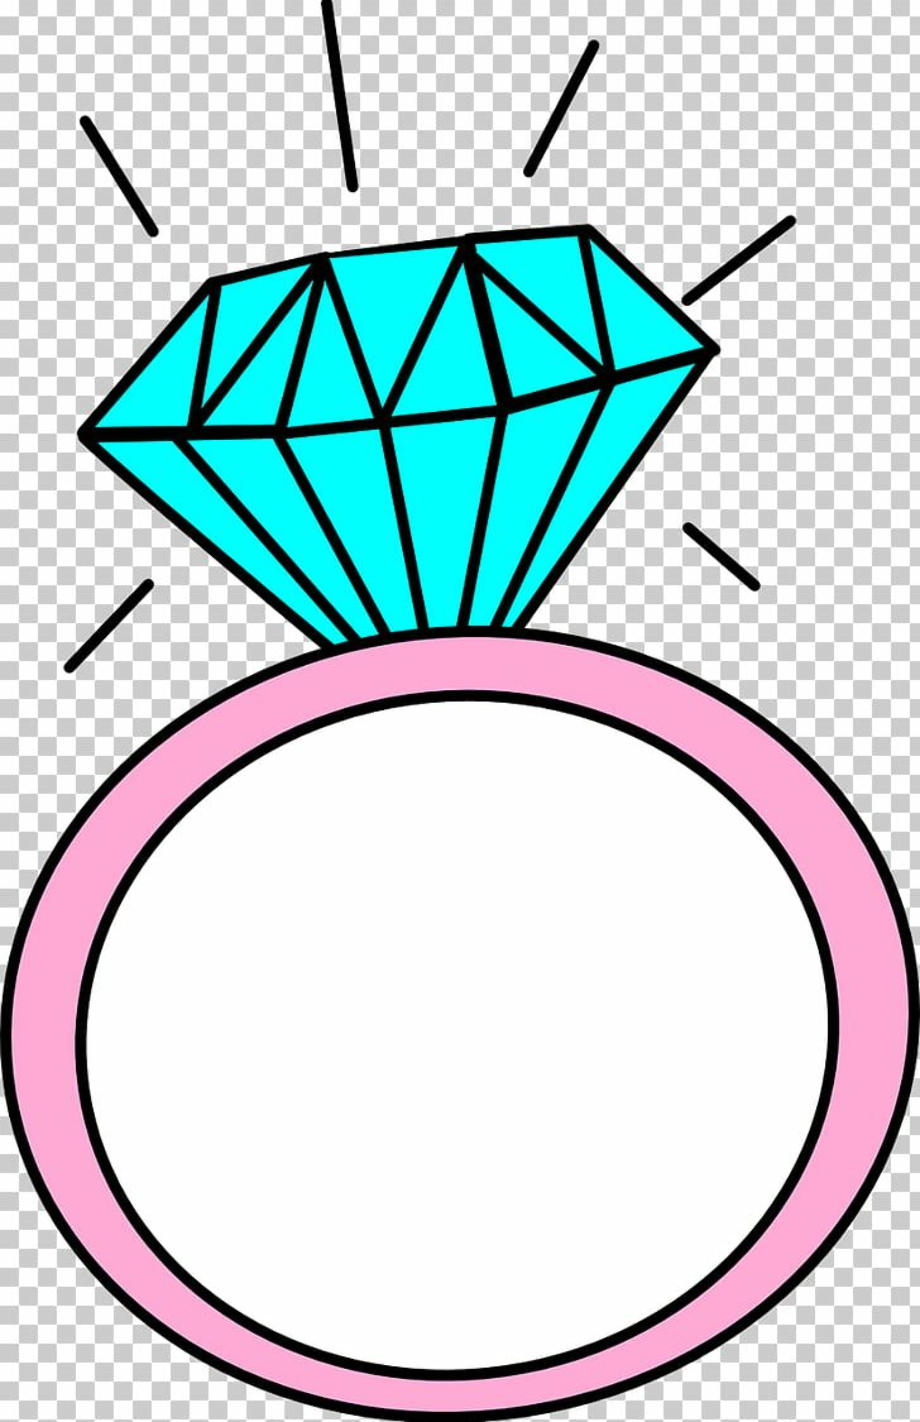 Download High Quality engagement  ring  clipart  cartoon 